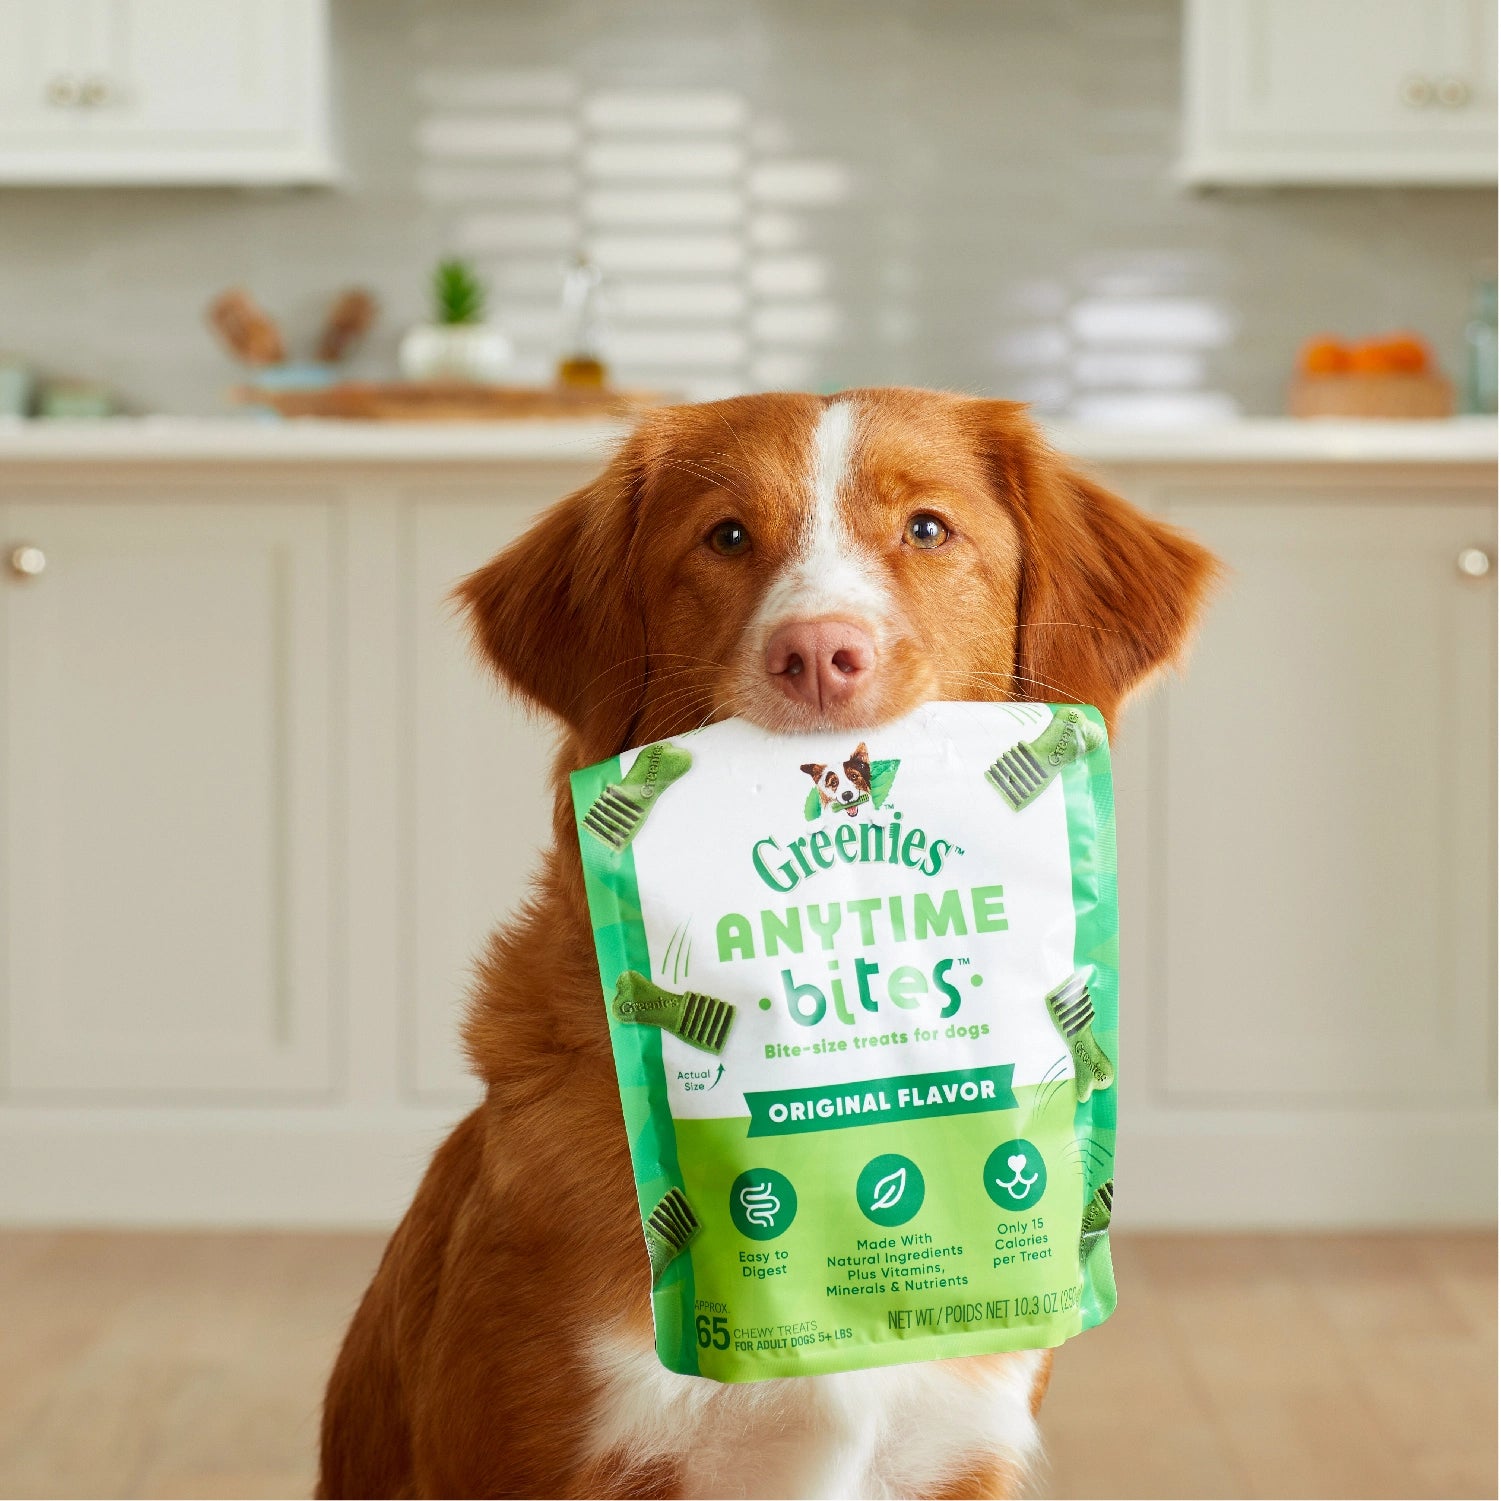 Dog with a bag of GREENIE Anytime Bites in its mouth